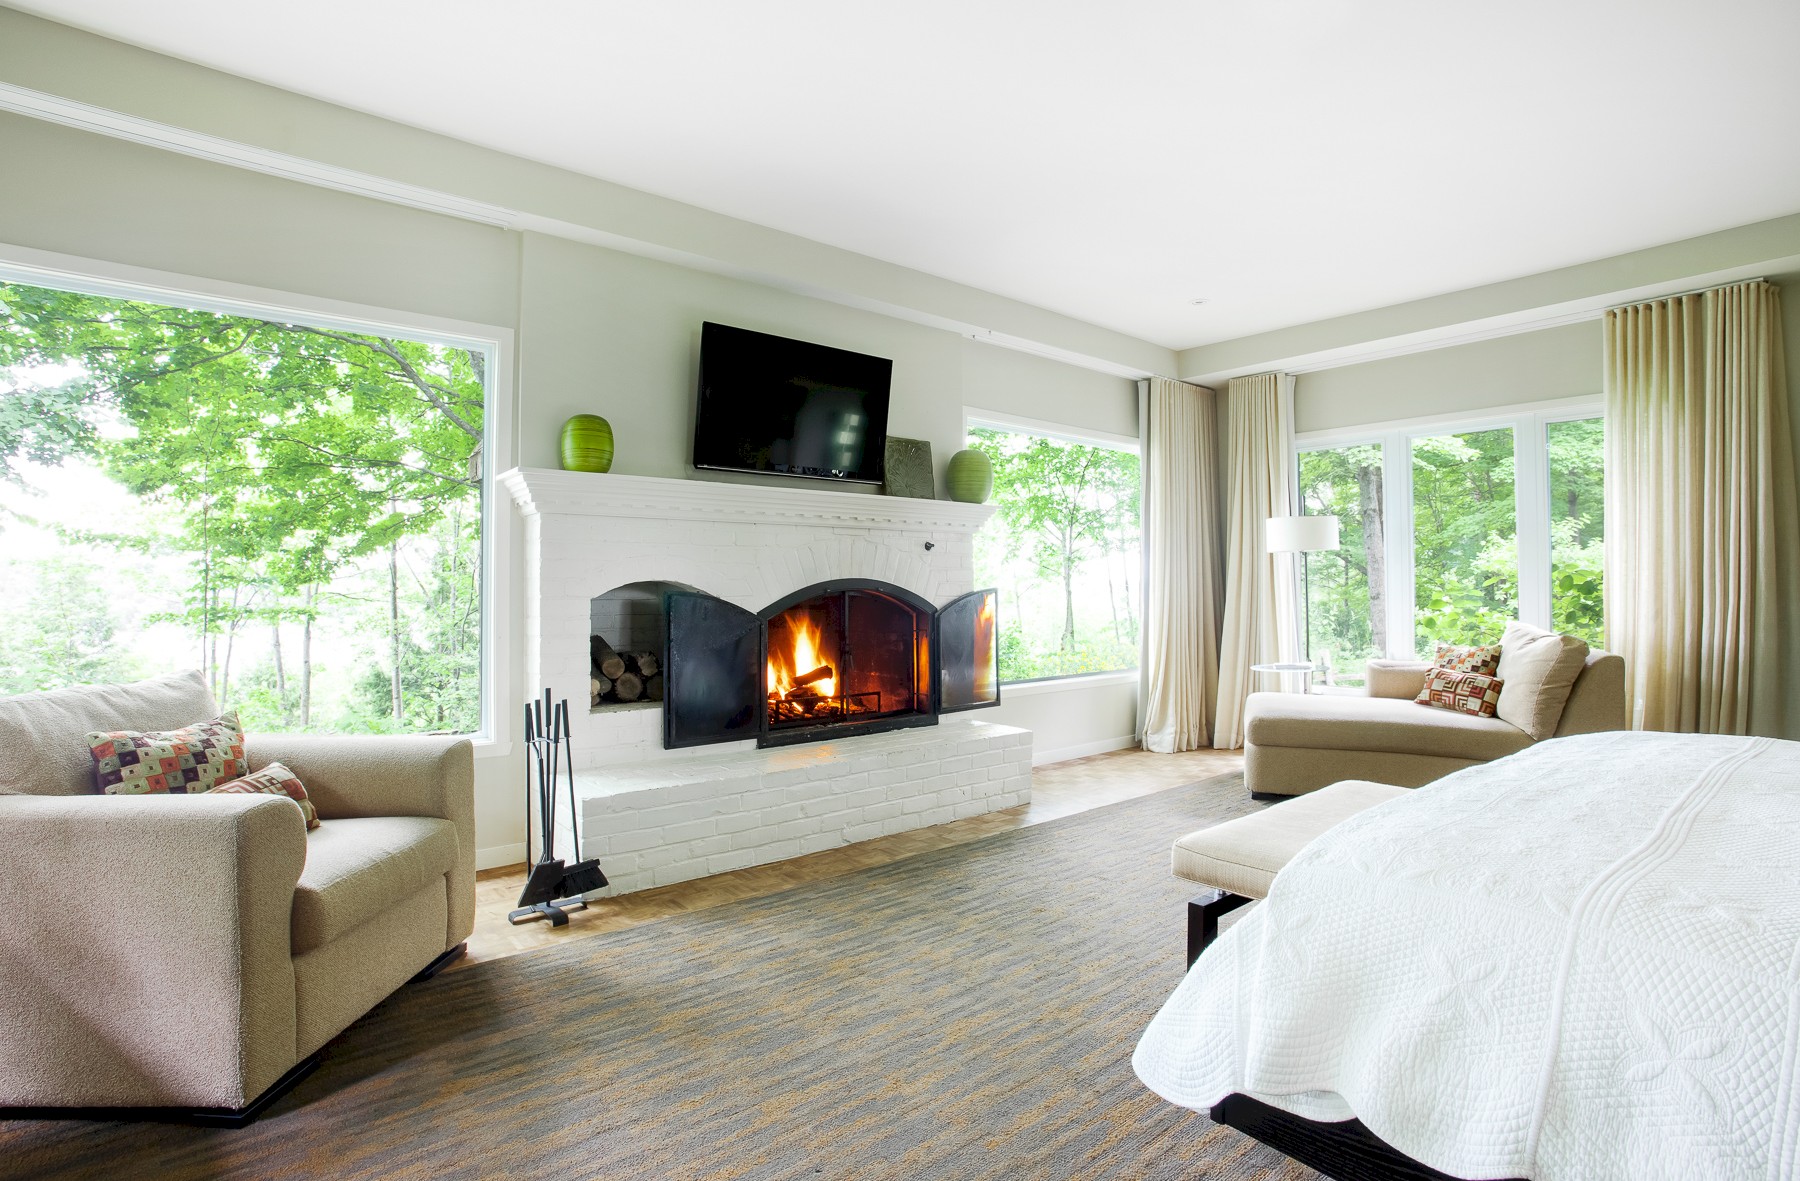 Modern room with lots of windows and a fireplace.